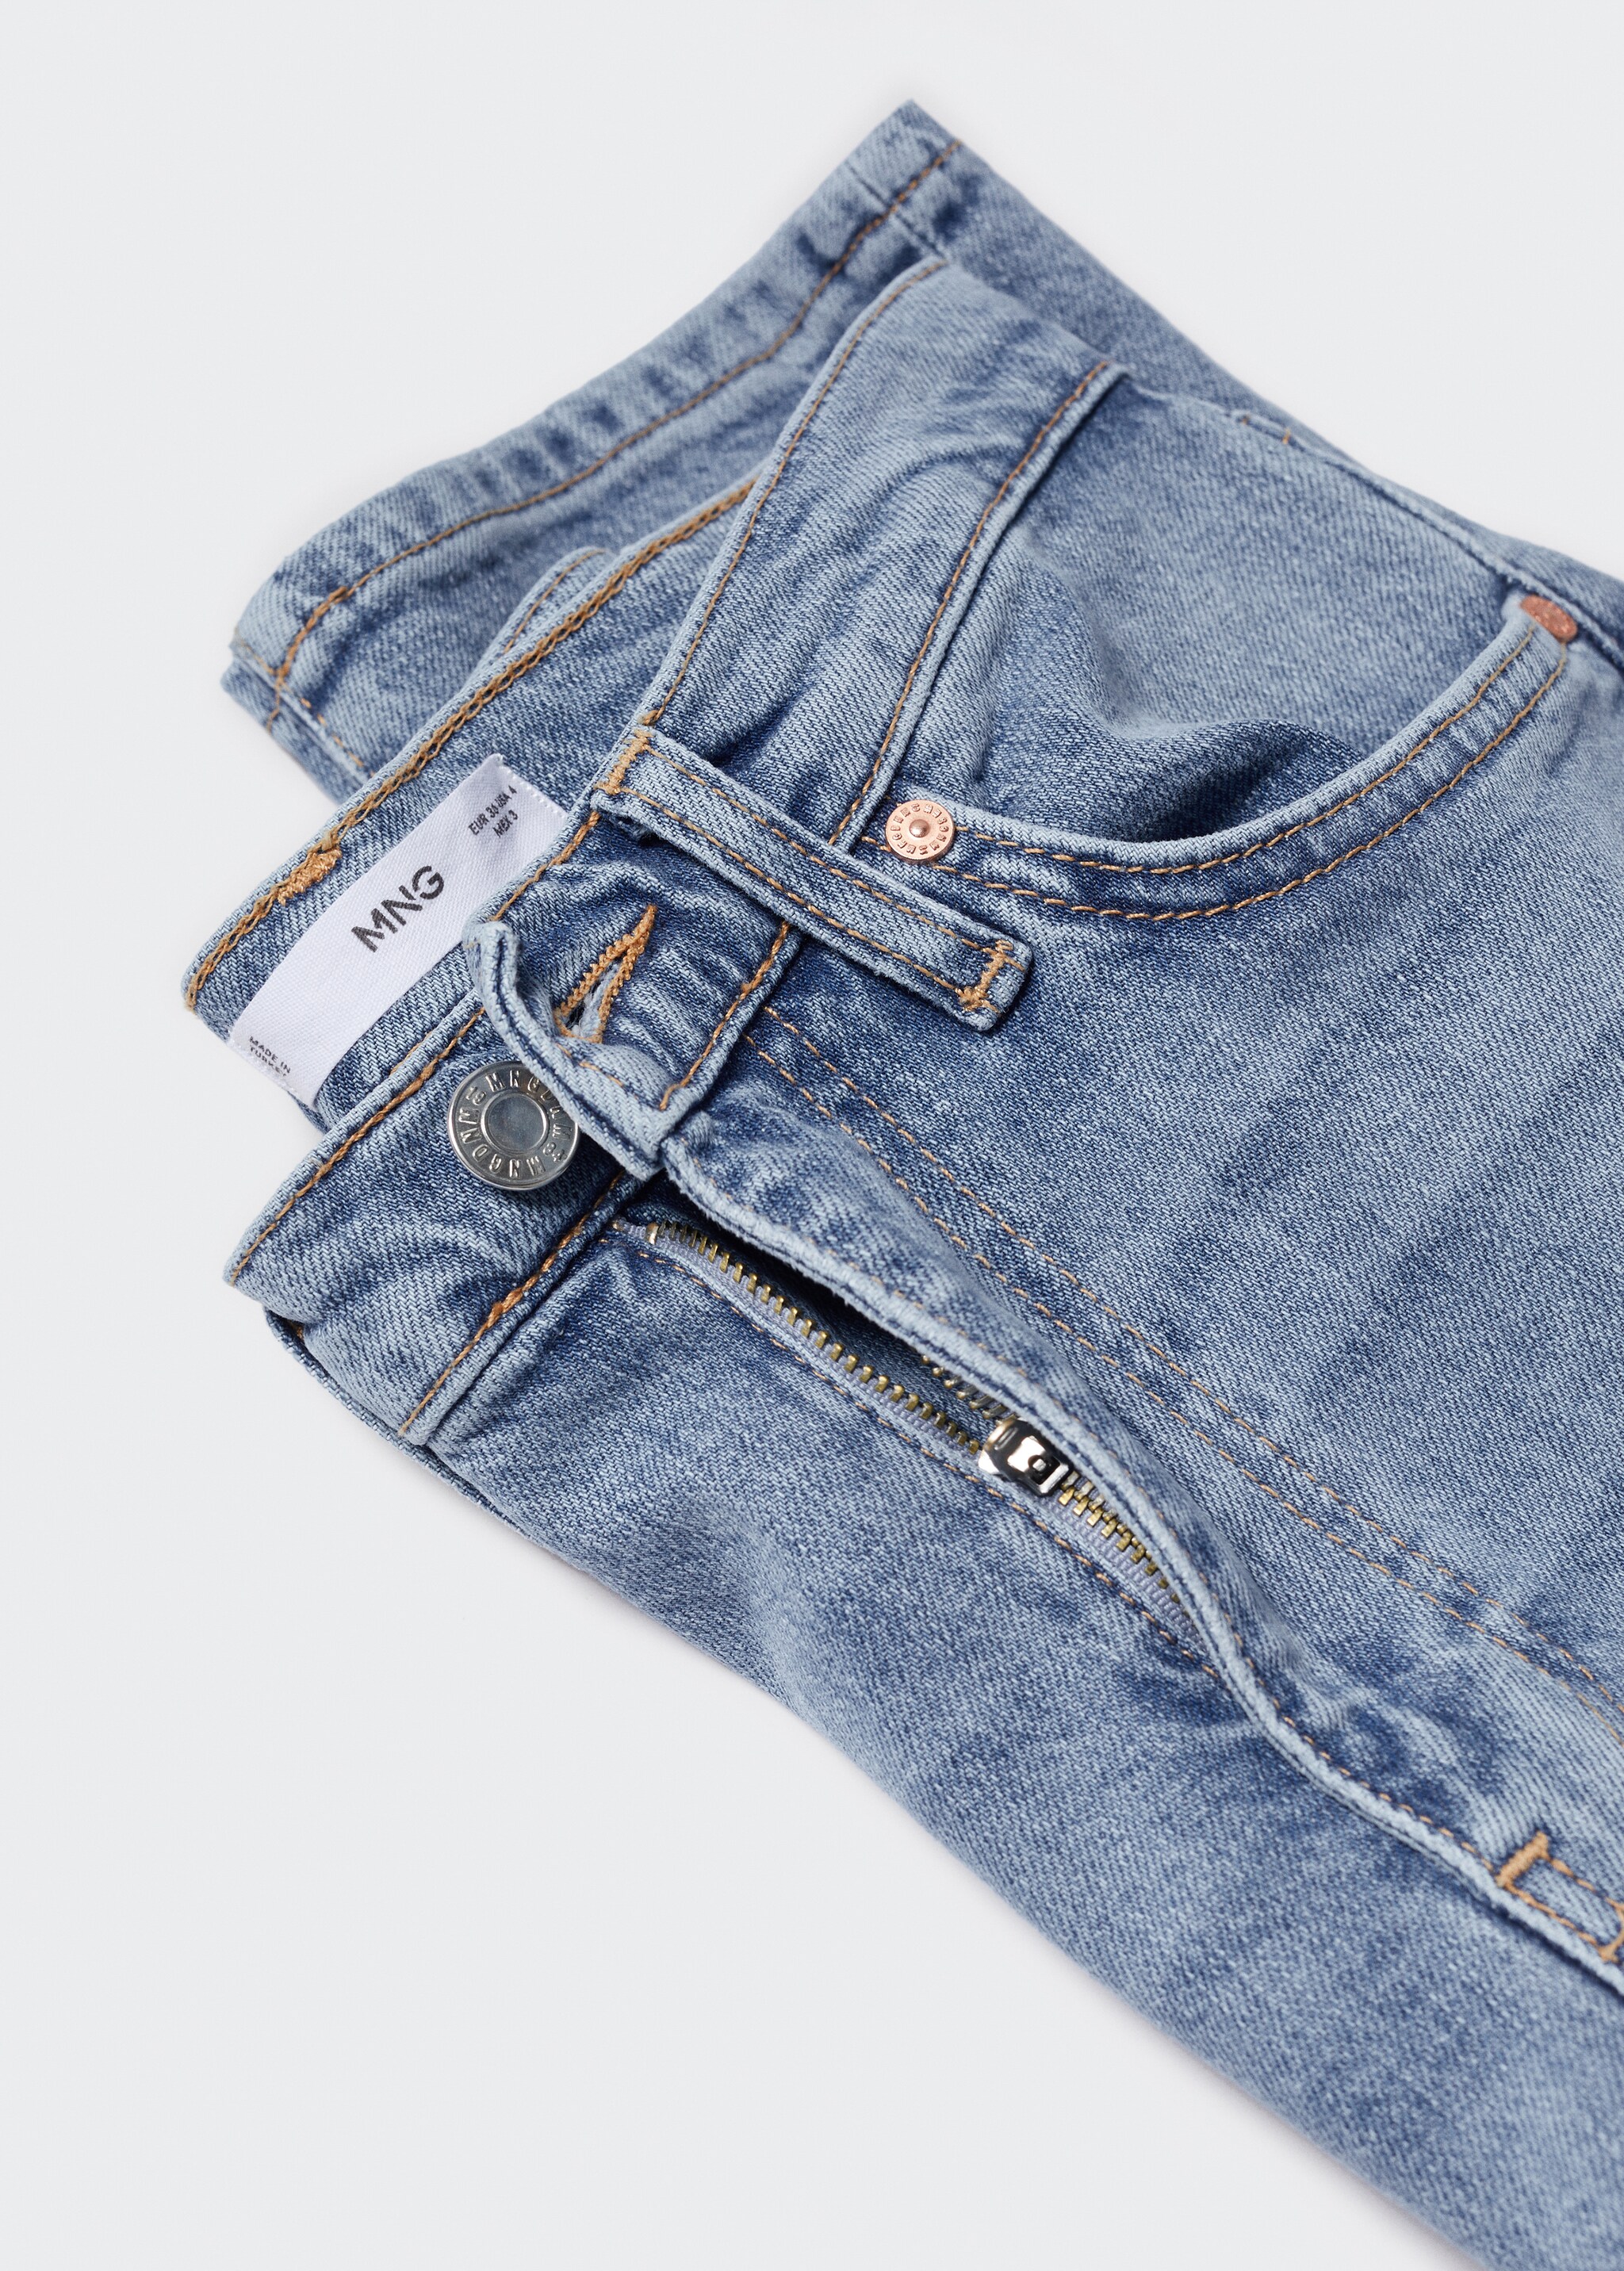 Slim cropped jeans - Details of the article 8